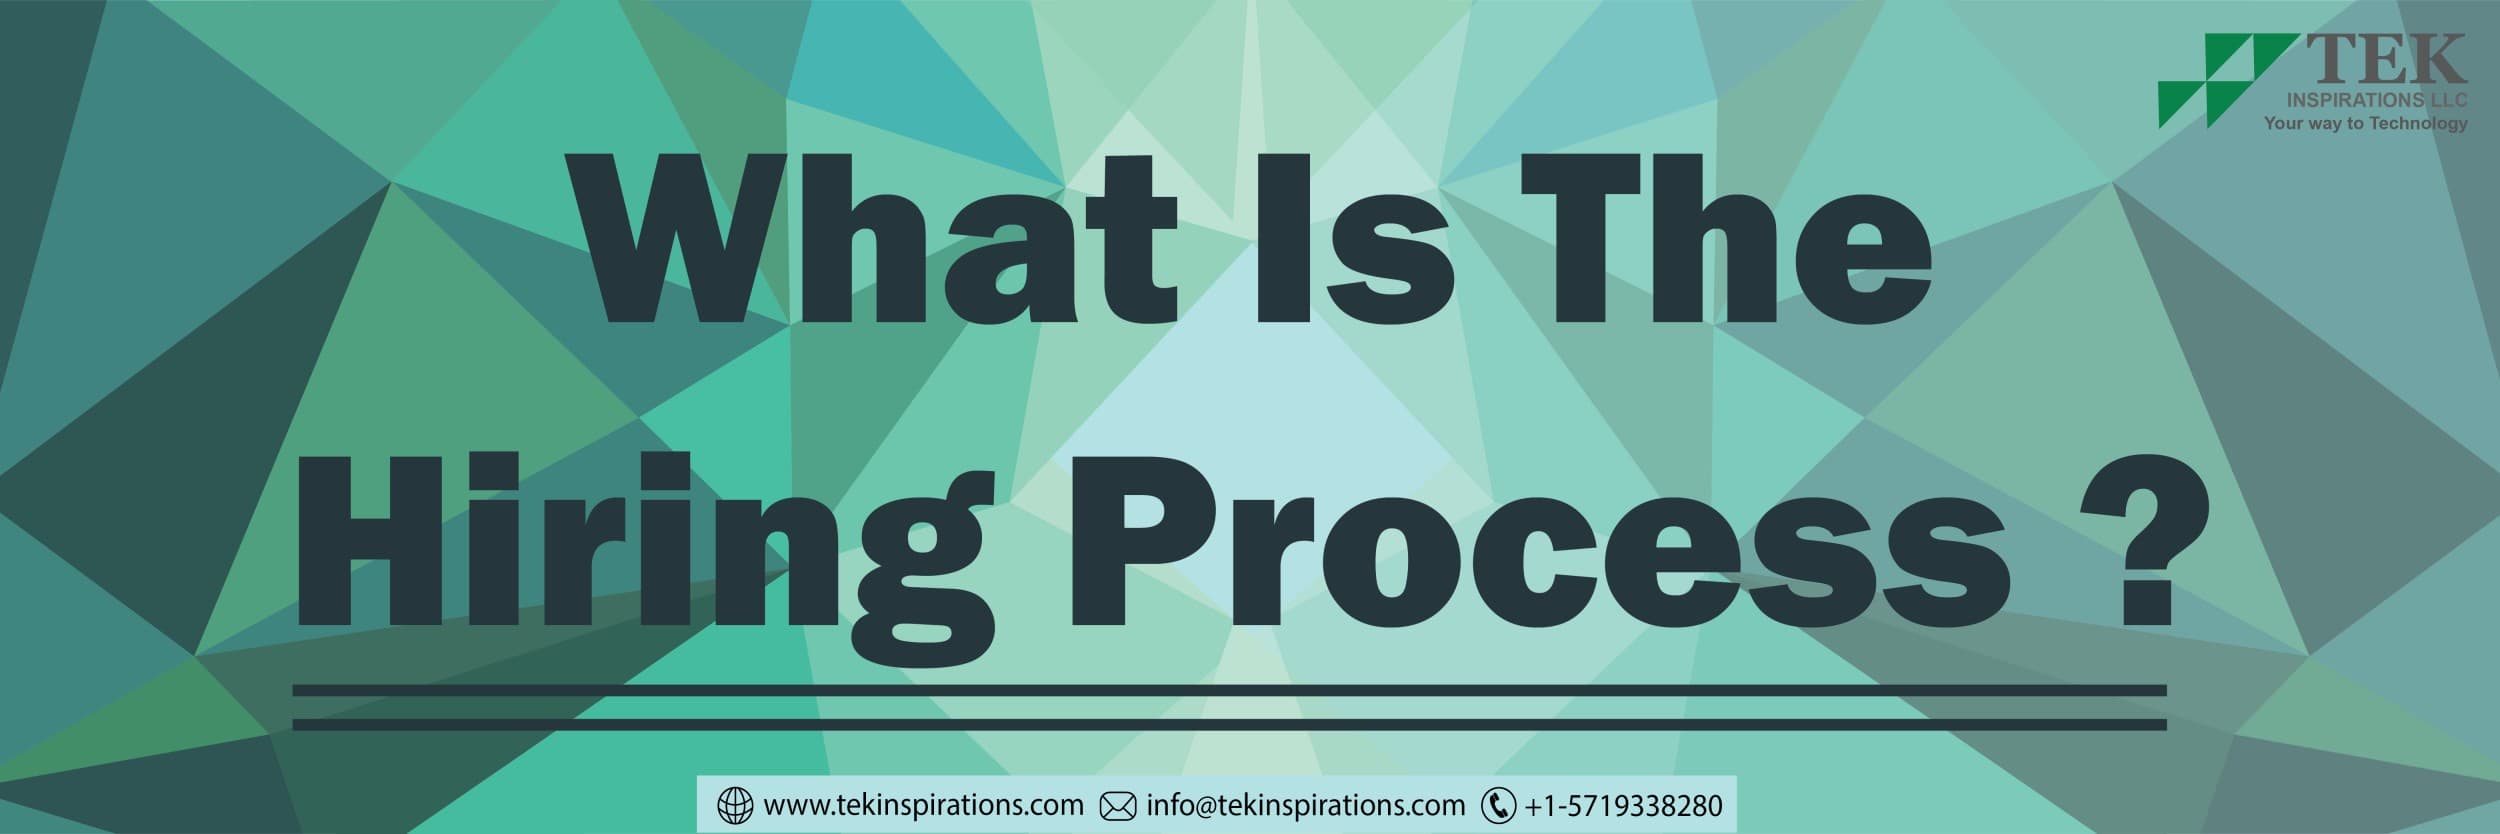 What Is The Hiring Process?